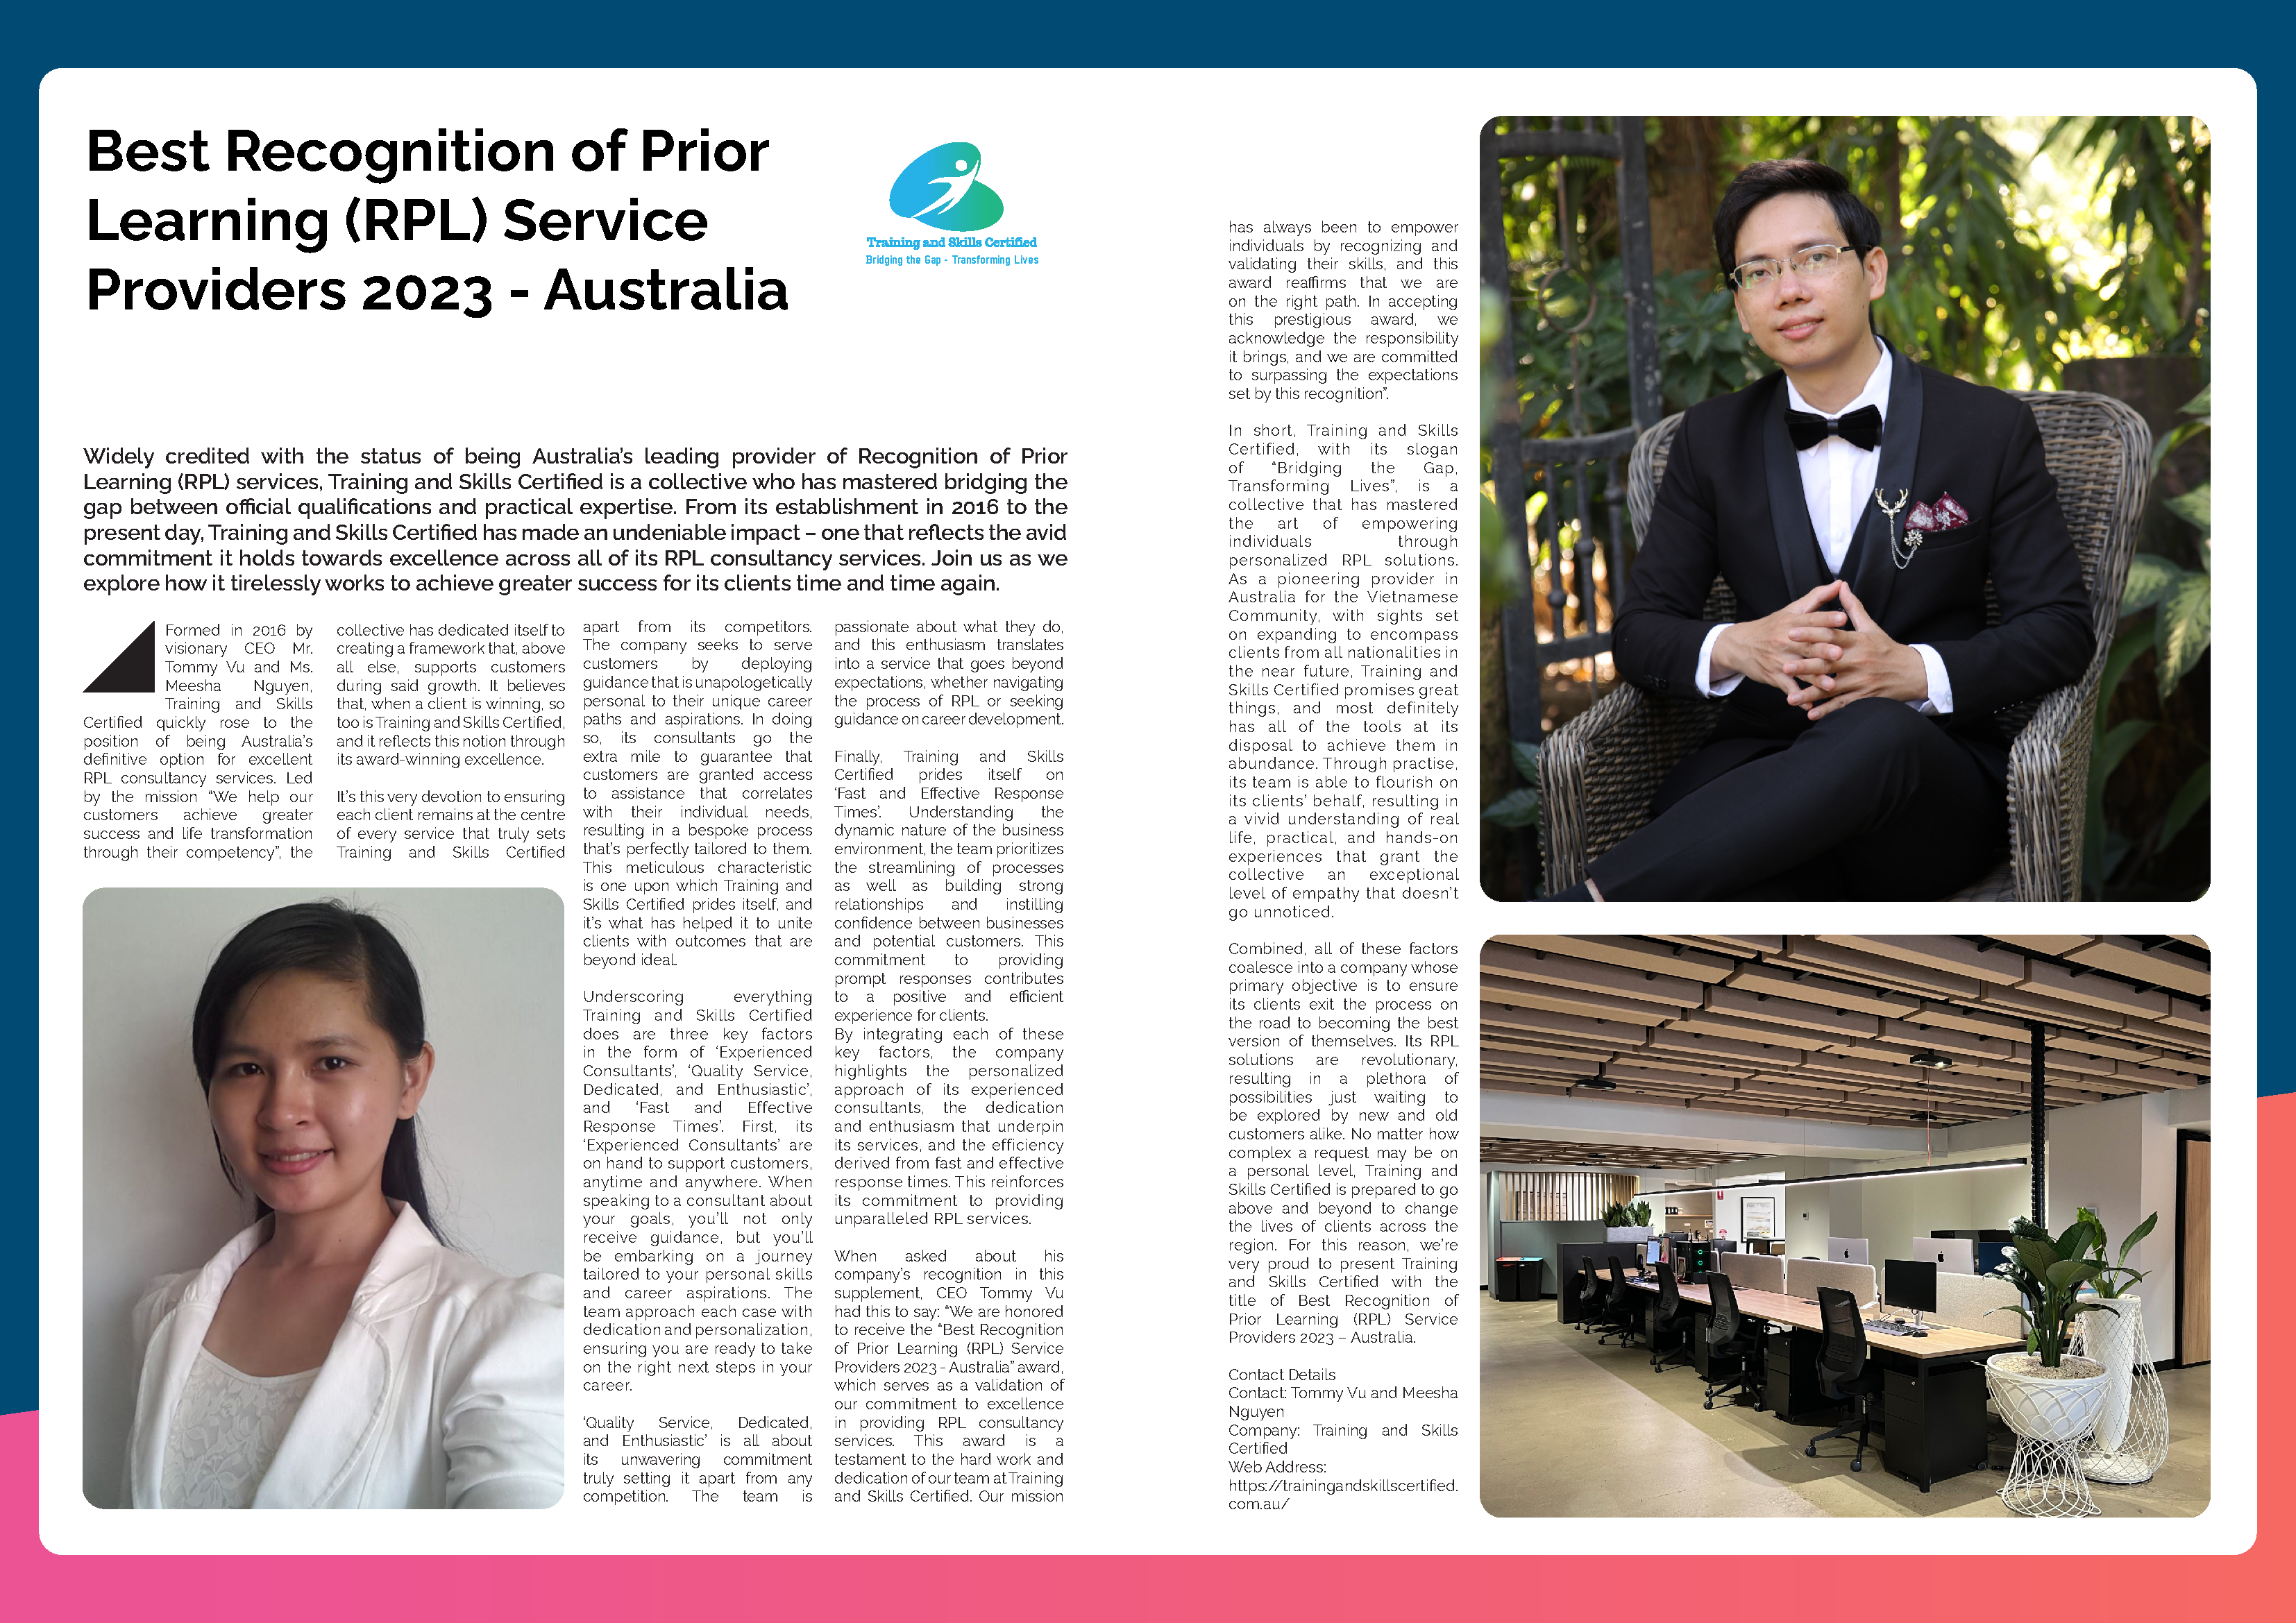 Best Recognition of Prior Learning (RPL) Service Providers 2023 - Australia